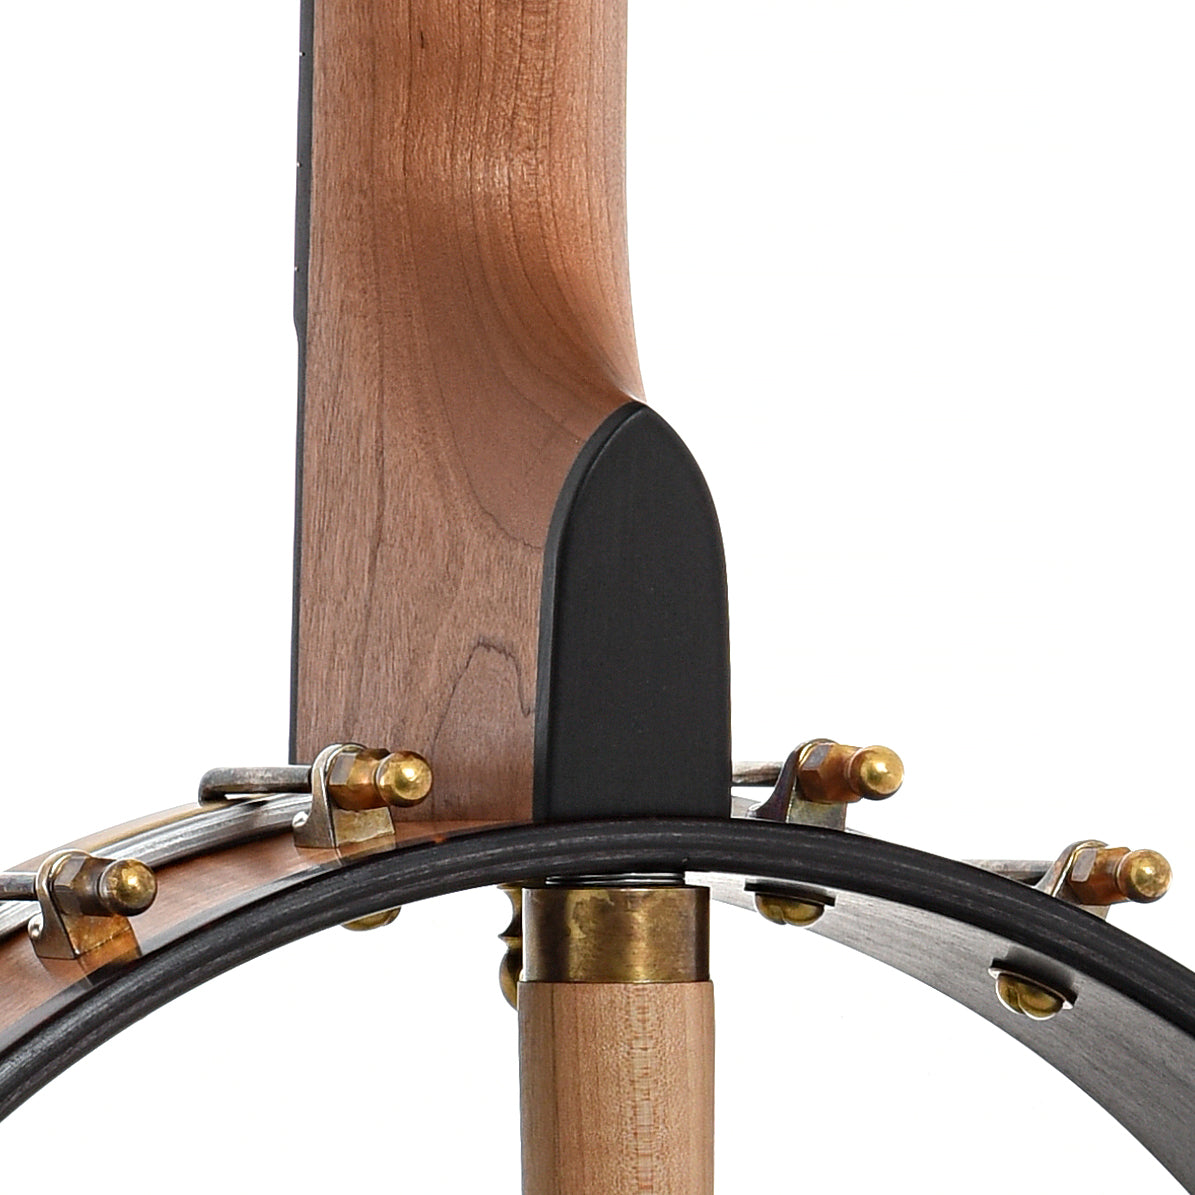 Neck joint of Ode Magician 13" Openback Banjo